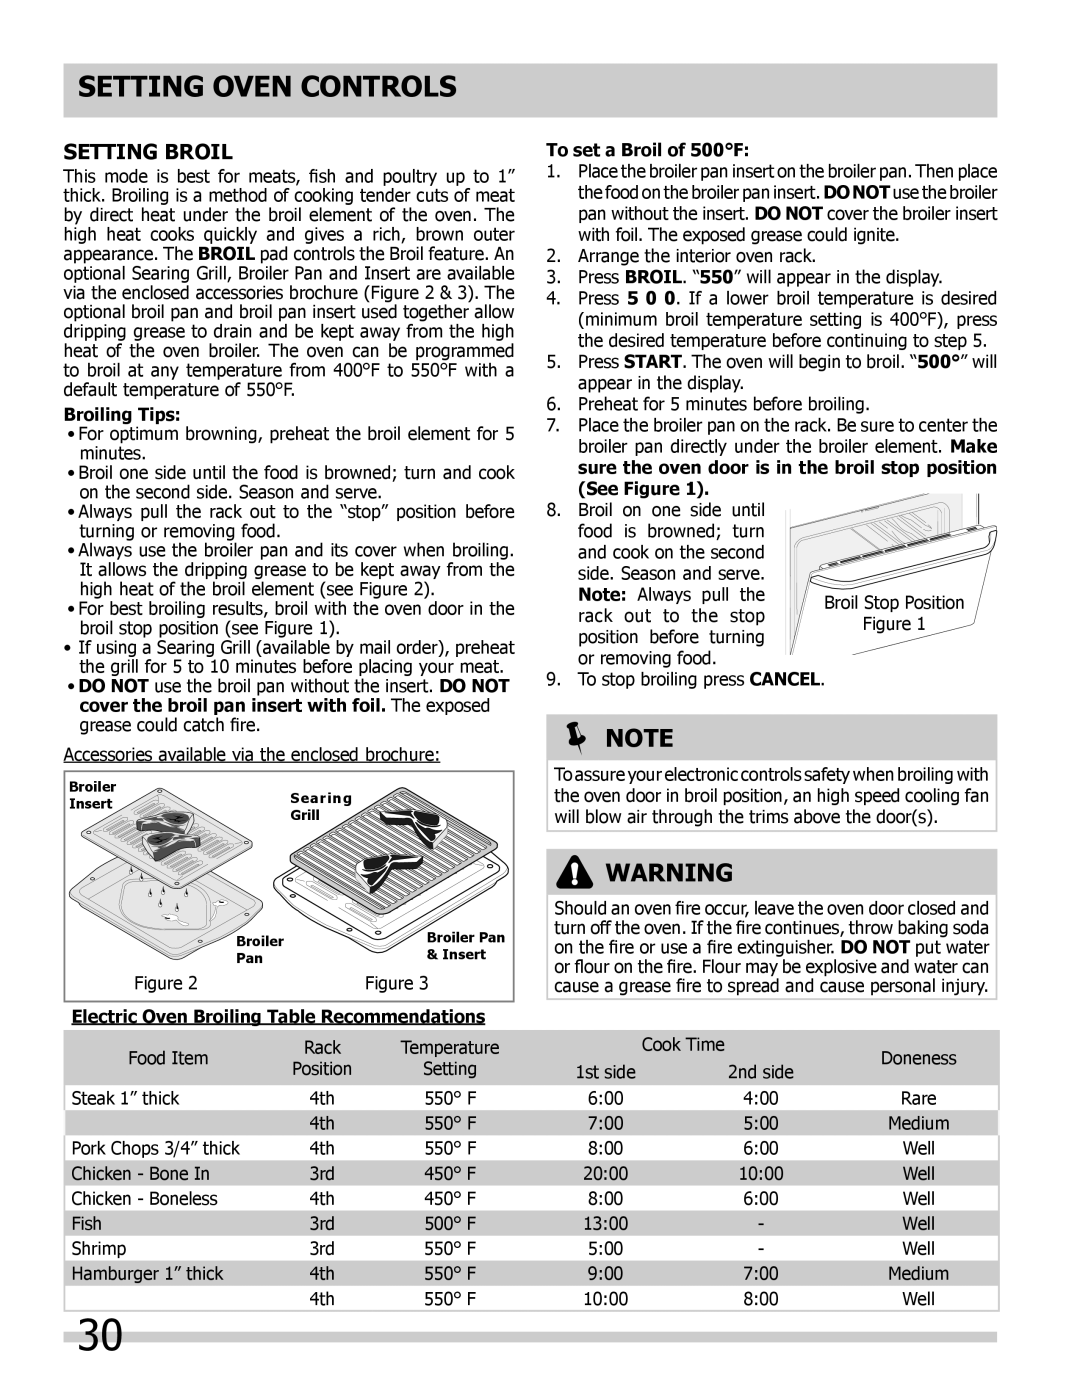 Frigidaire FGES3045KF Setting Broil, Broiling Tips, Electric Oven Broiling Table Recommendations, To set a Broil of 500F 